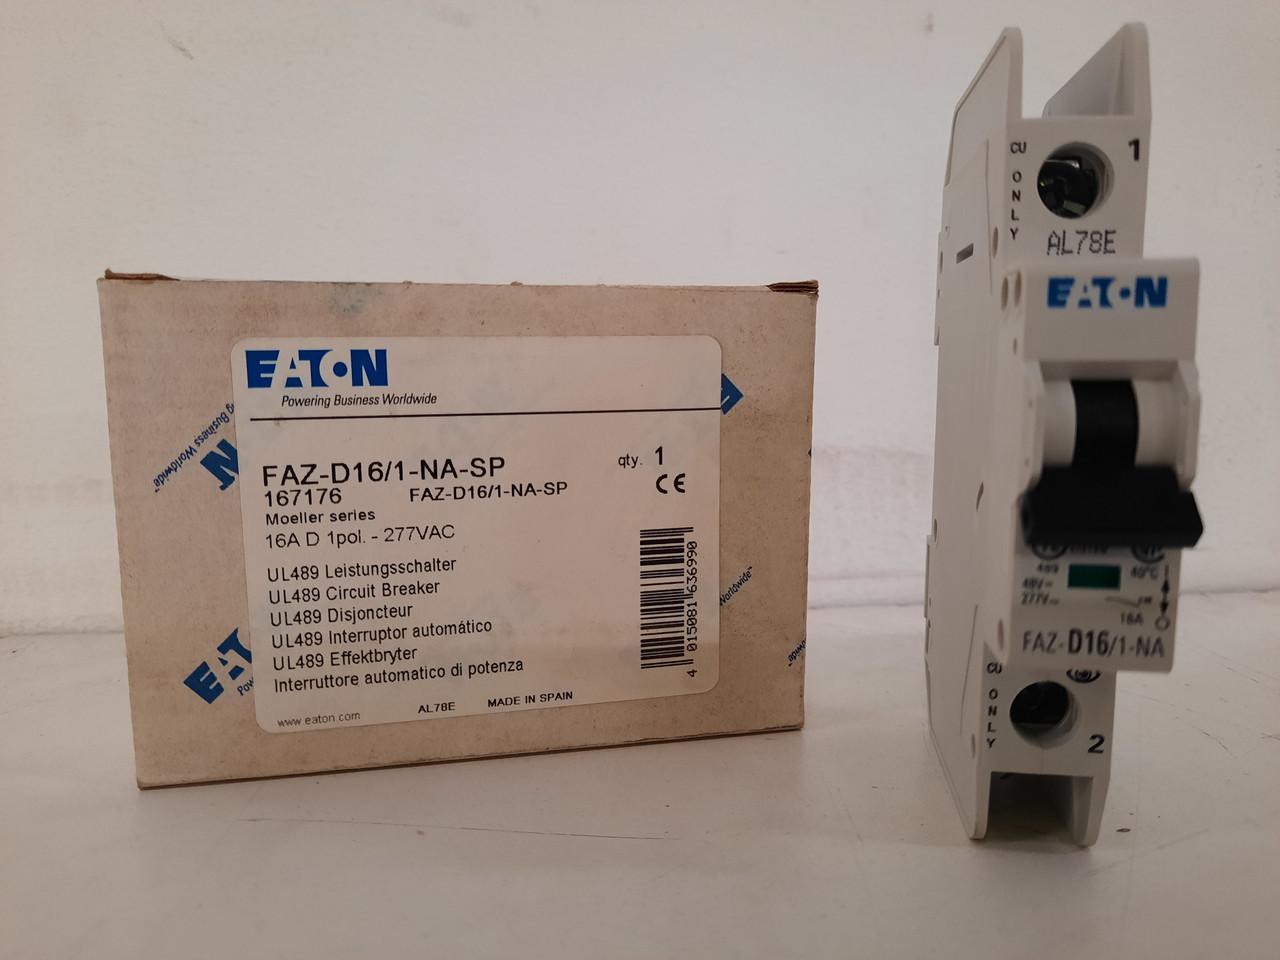 Eaton FAZ-D16/1-NA-SP Eaton FAZ branch protector,UL 489 Industrial miniature circuit breaker - supplementary protector,Single package,High levels of inrush current are expected,16 A,10 kAIC,Single-pole,277 V,10-20X /n,Q38,50-60 Hz,Screw terminals,D Curve